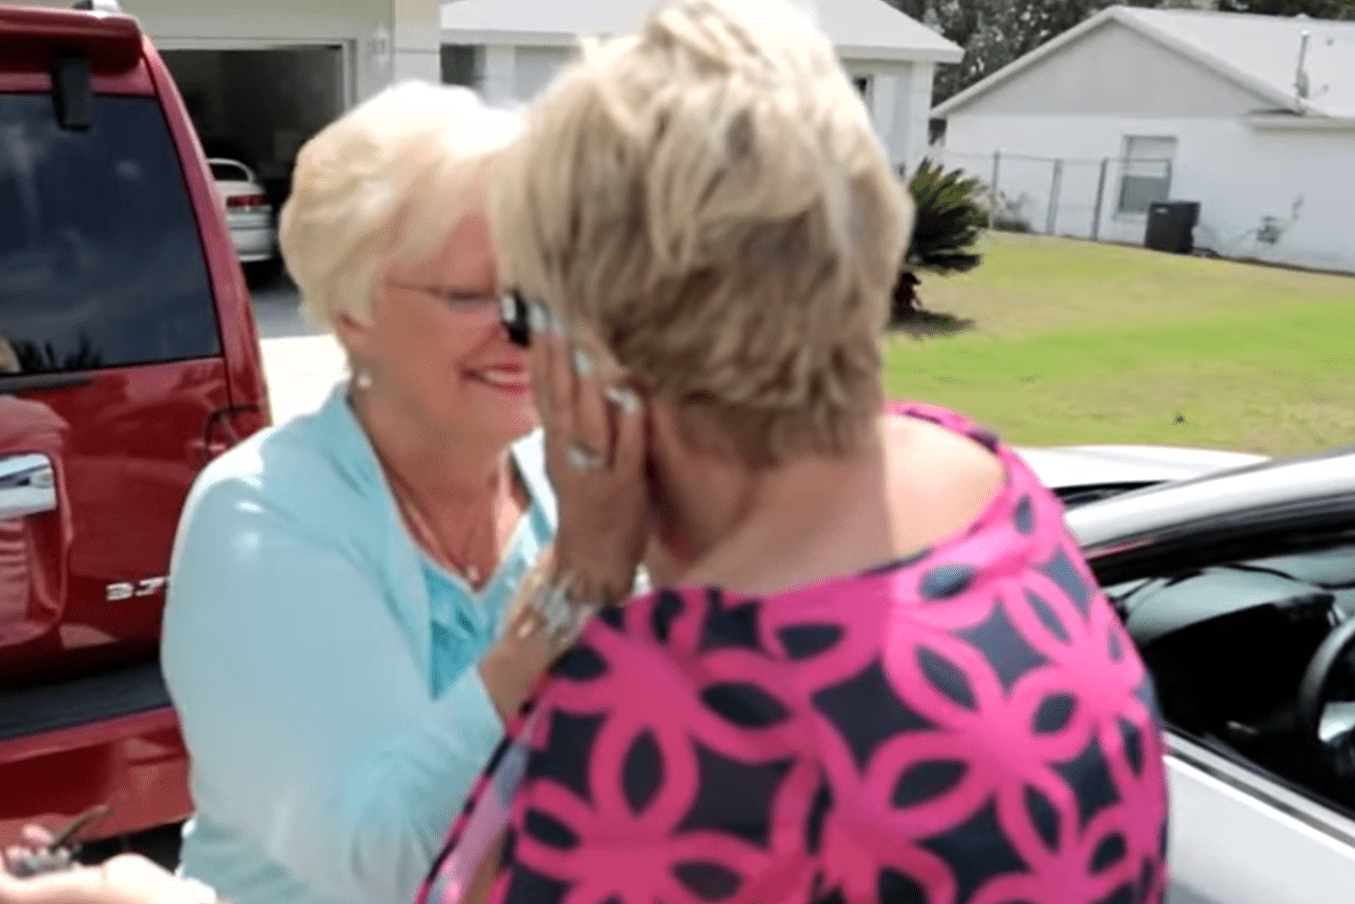 Christine Shirley holds Teresa Stinson's face in her hands and looks at her lovingly .┃Source: youtube.com/ABCNews